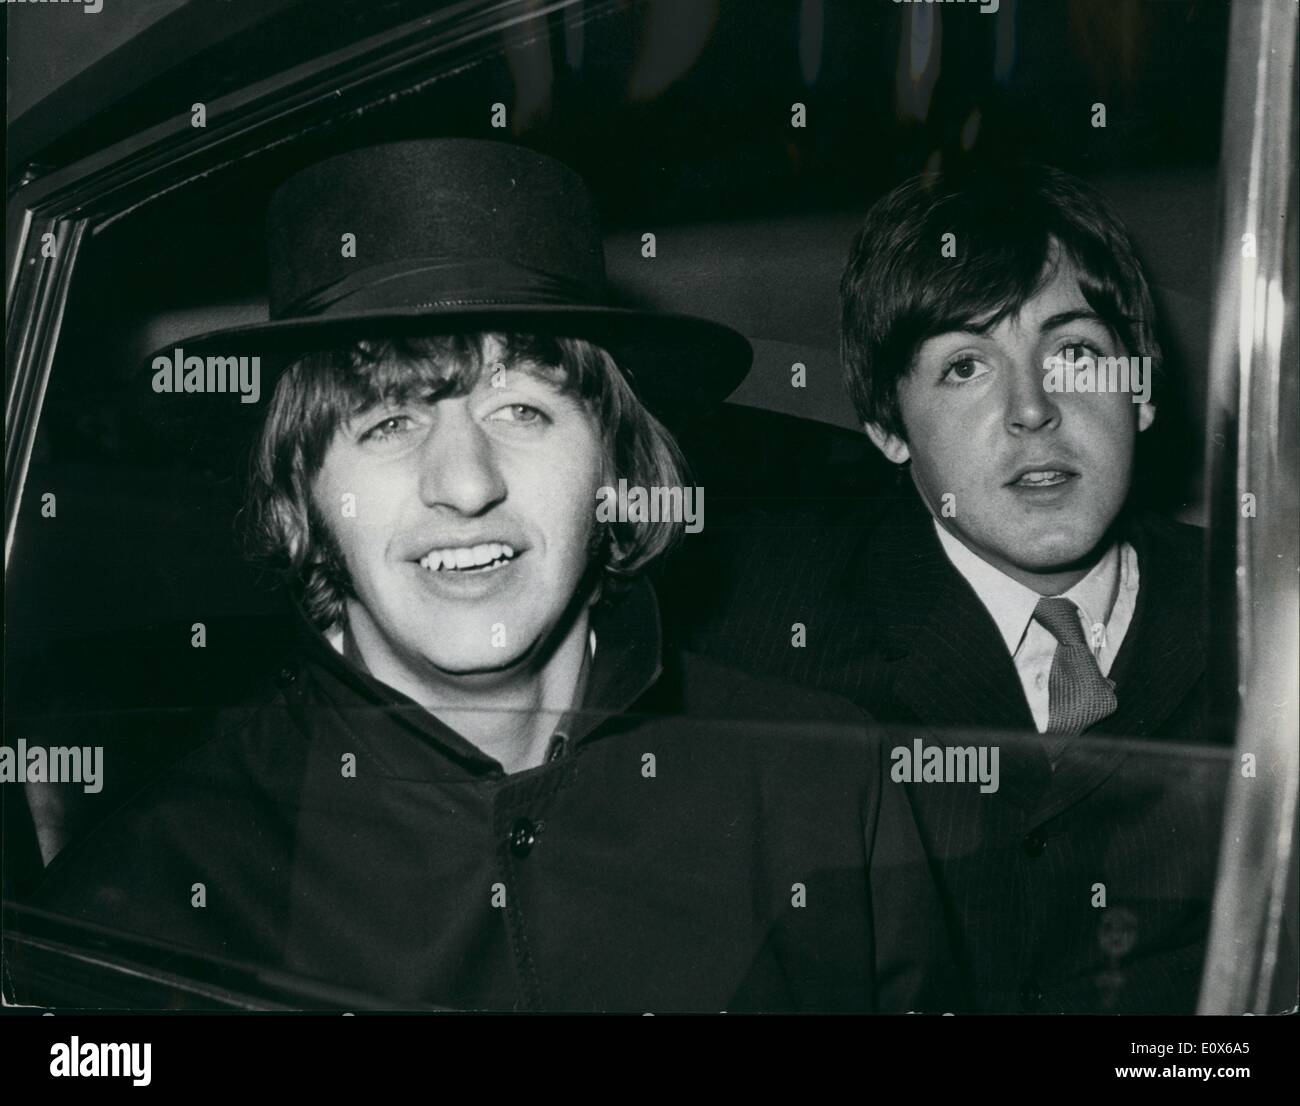 Jul. 07, 1965 - The Beatles return home after their European tour greeted by Hundreds of Fans: This morning the Beatles returned home from Spain after their European Tour end at London Airport Hundreds of fans were their to give them a welcome home. Photo shows Ringo seen in the car with Paul on their arrival back from Spain at London Airport with a Pocador Style hat. Stock Photo